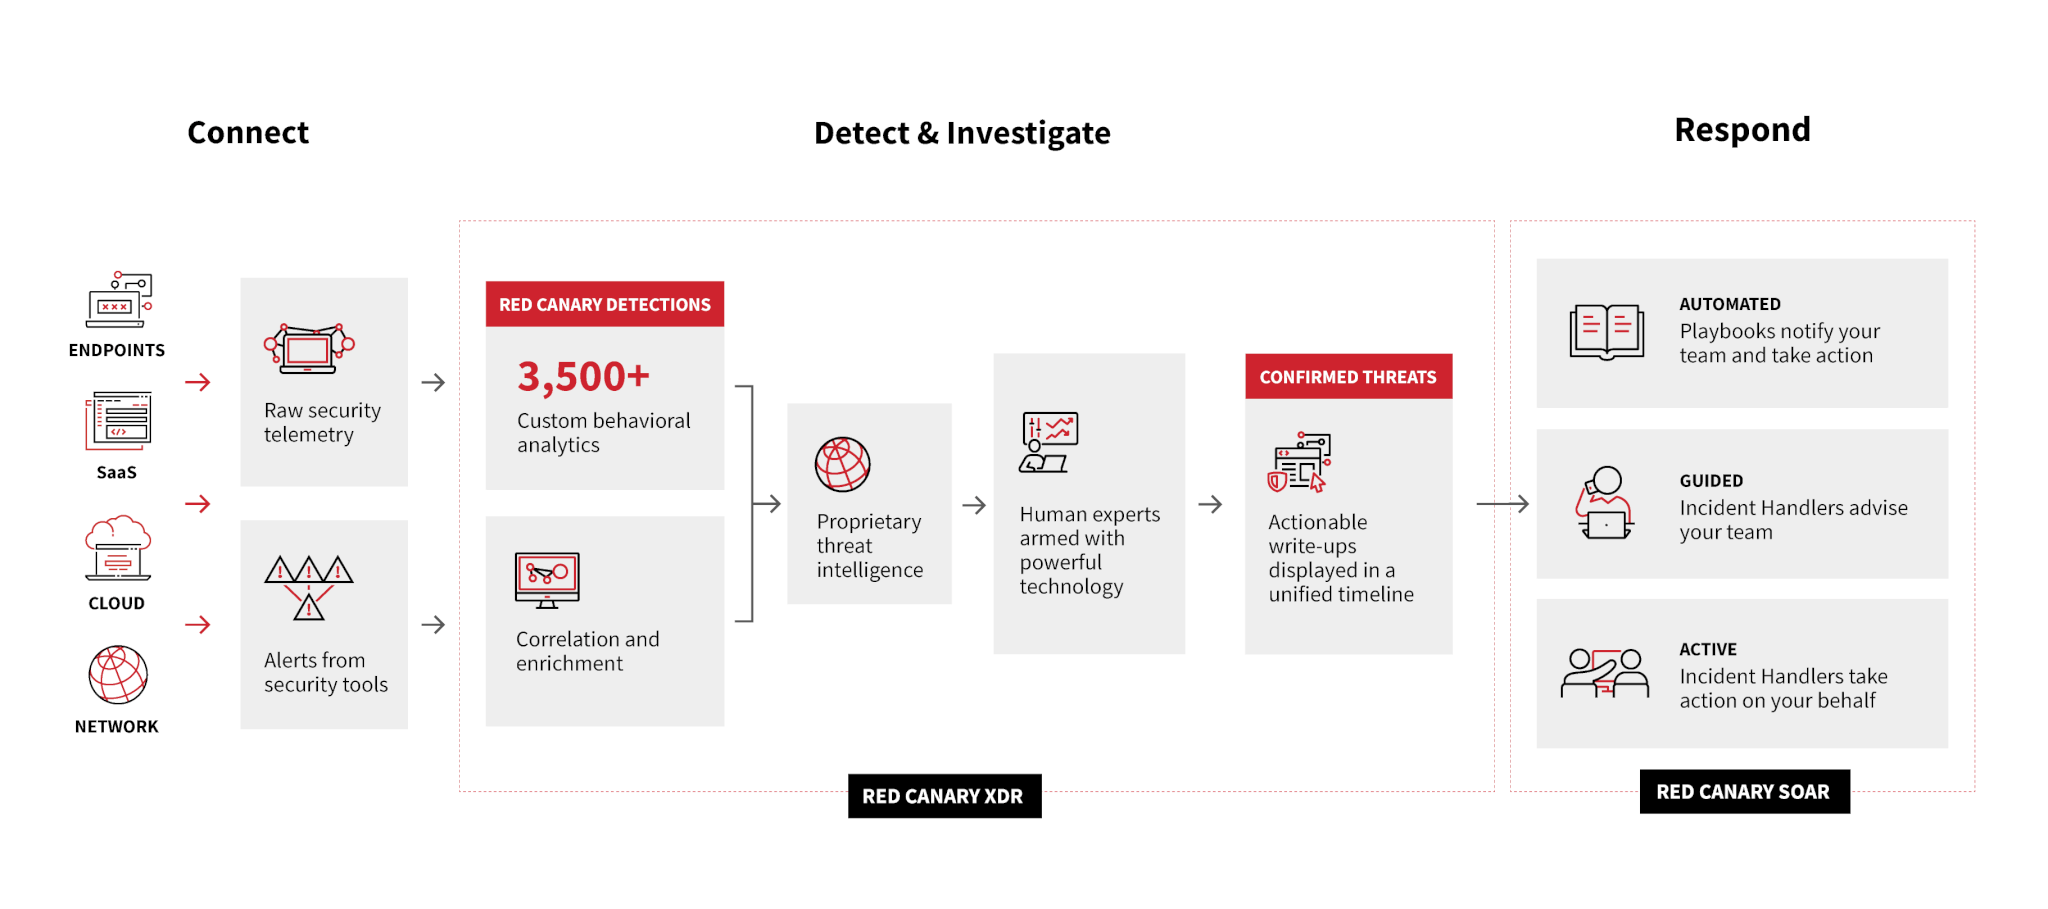 Diagram to show how Red Canary works to Connect, Detect, Investigate and Respond